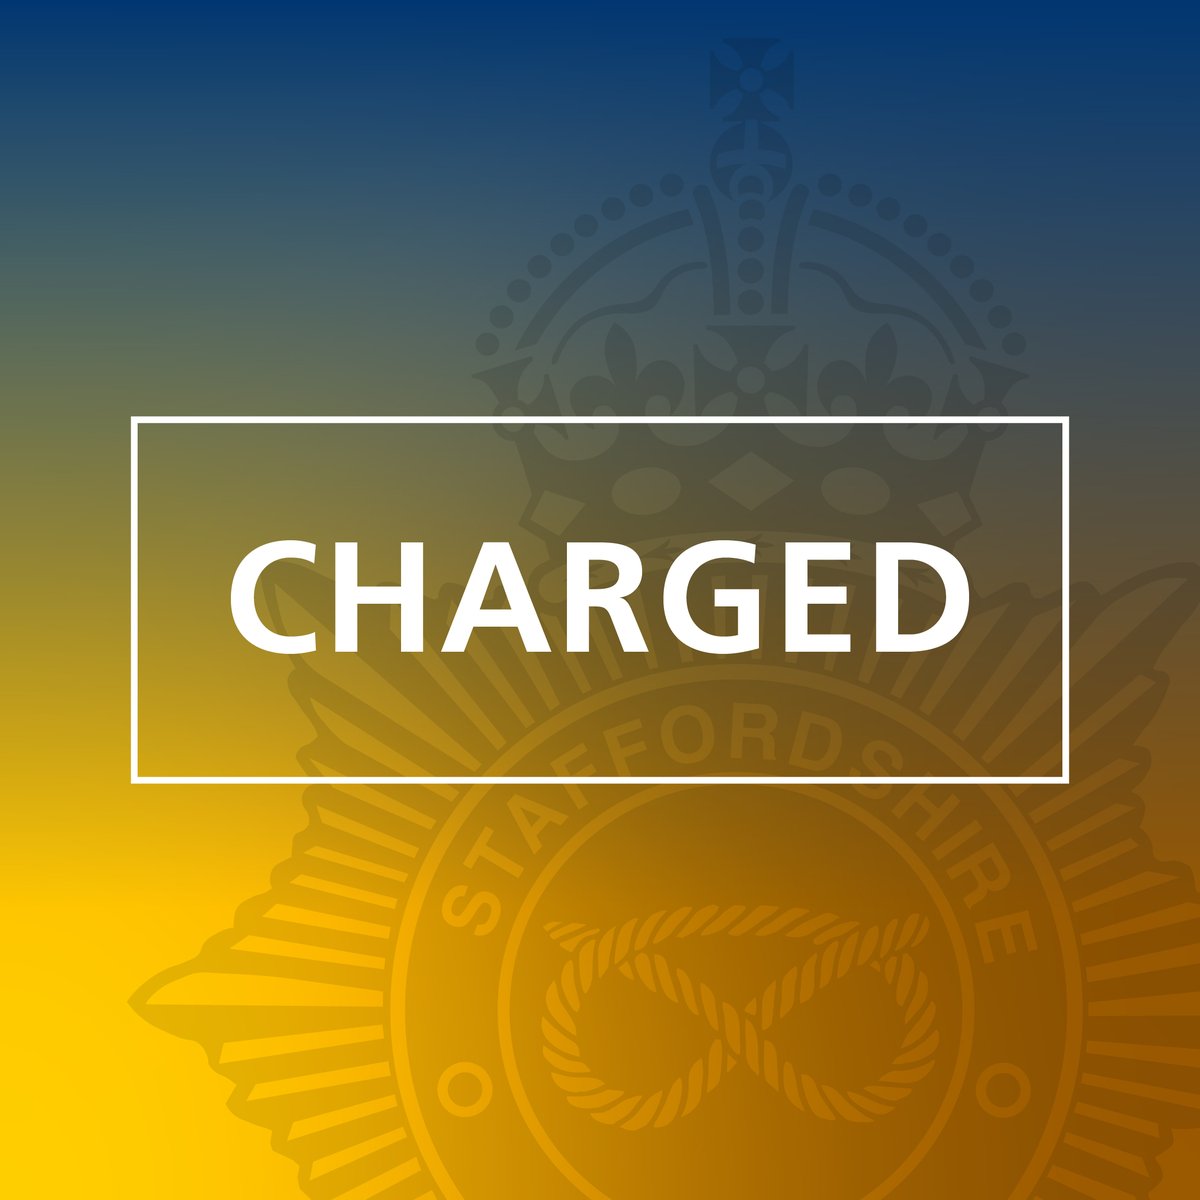 #OpTarget | Seven people have been charged with drug supply offences following a number of searches in Burton-on-Trent over the last two days. Full story: orlo.uk/QUppN